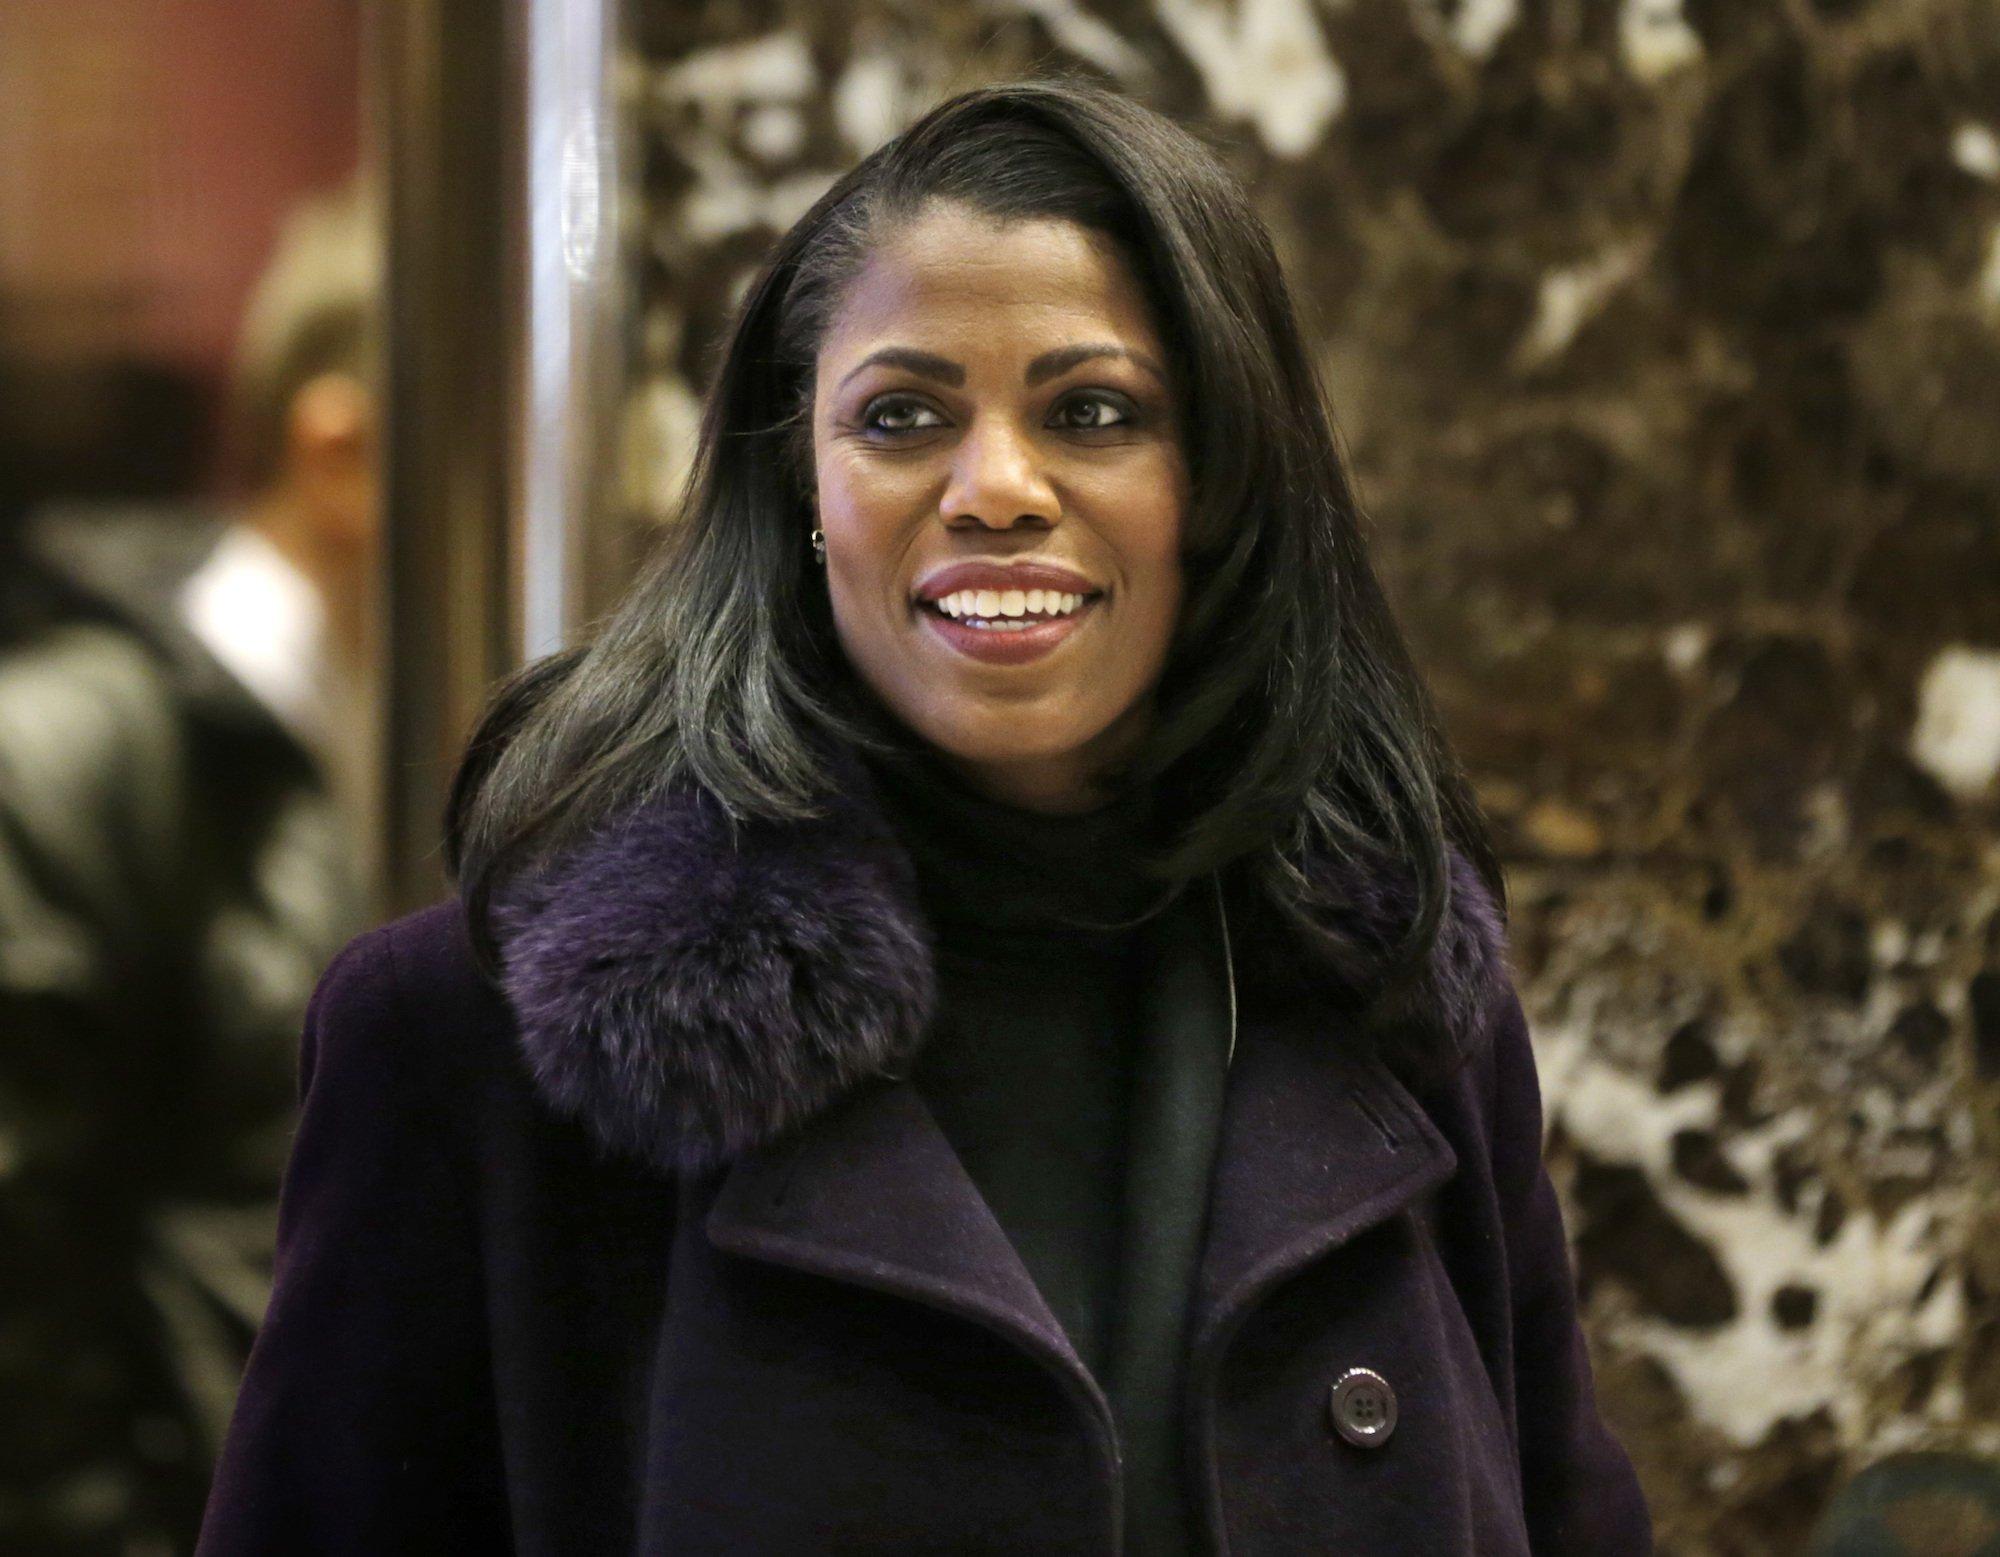 Ms Manigault was spotted last month at Trump Tower